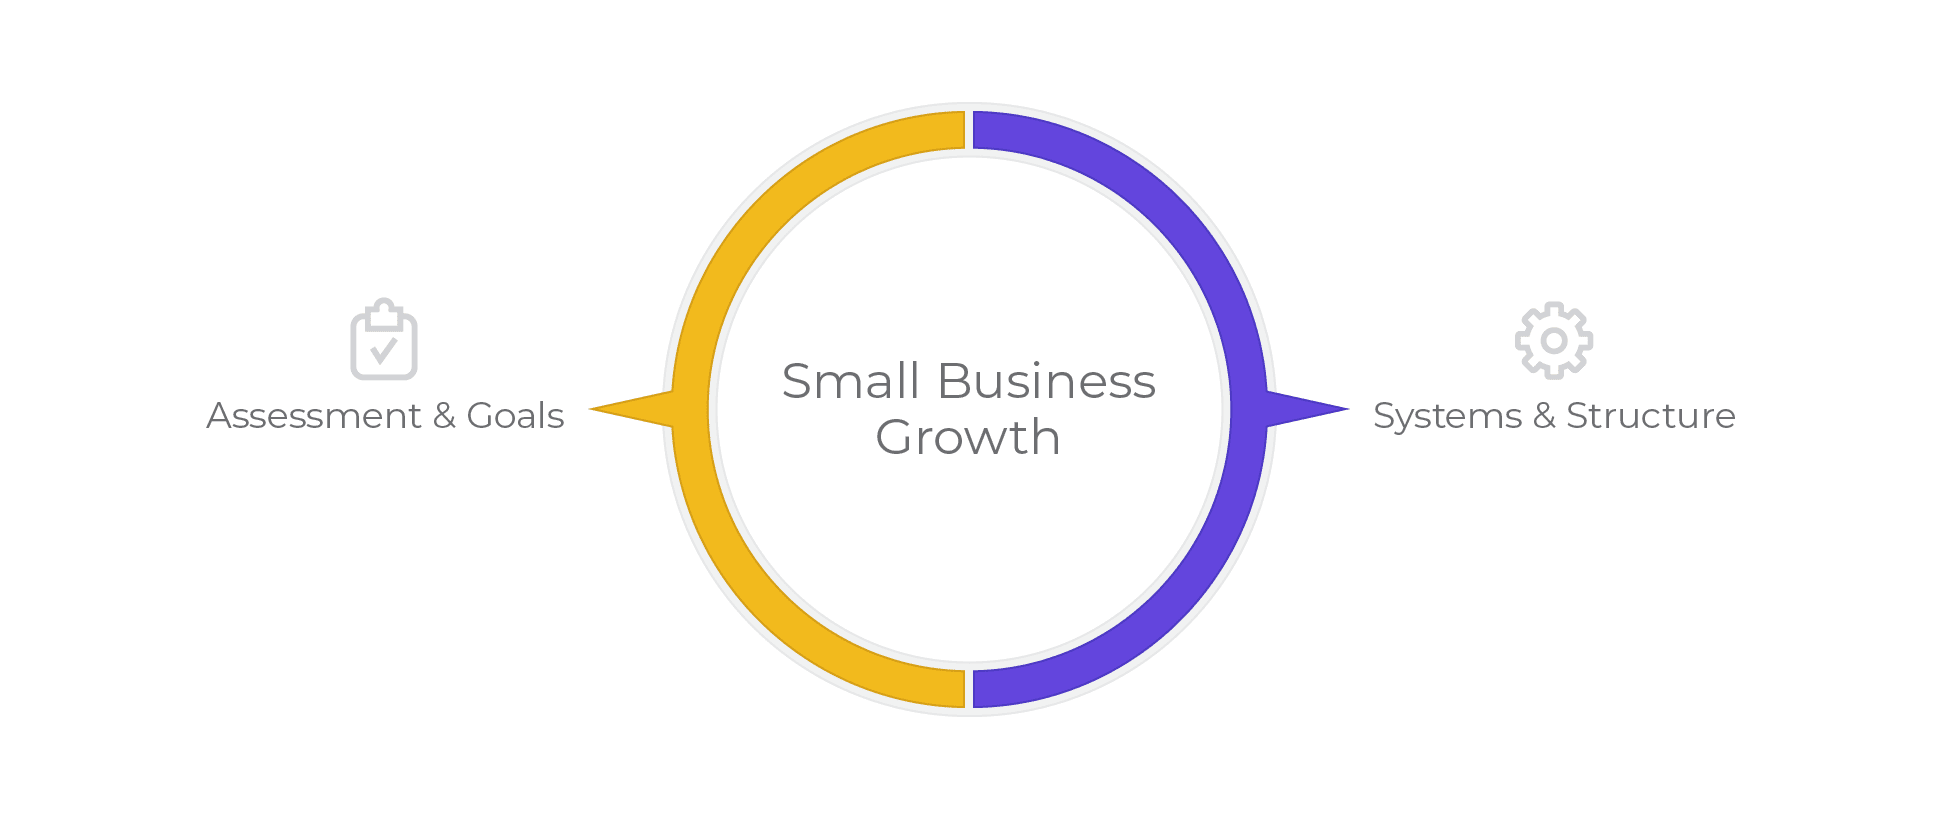 Small Business Growth - assessment & goals and systems & structures